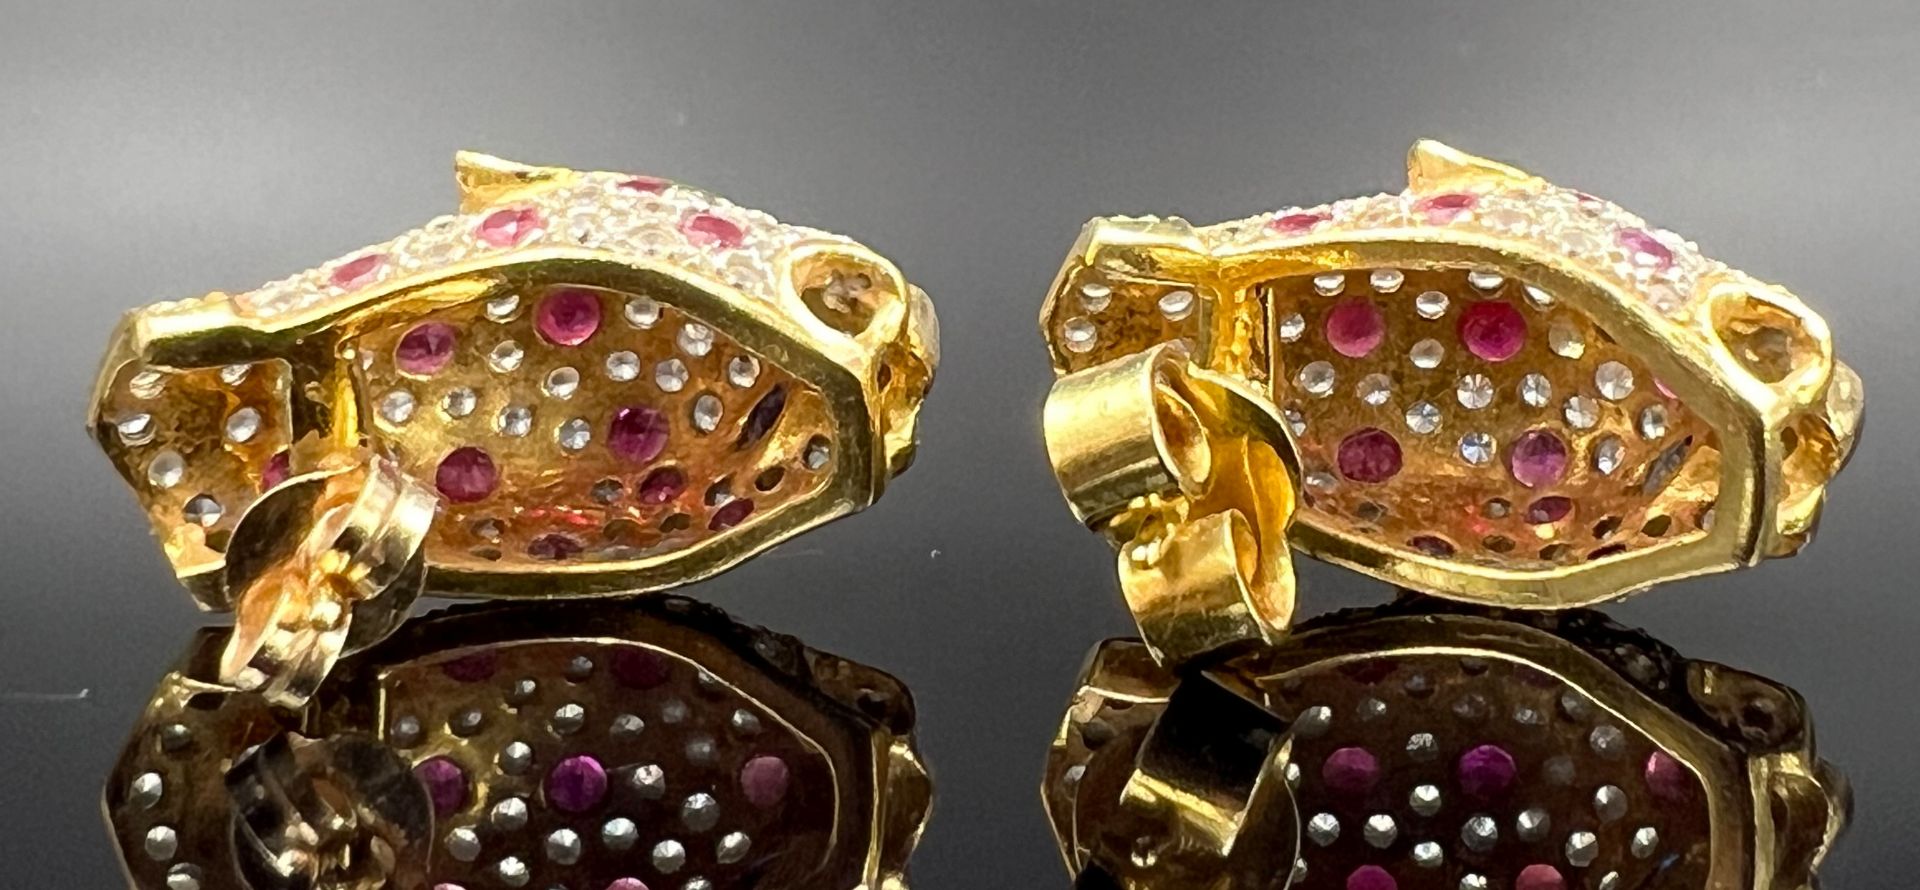 Pair of "Cheetah" stud earrings. 750 yellow gold and white gold with gemstone setting. - Image 4 of 8